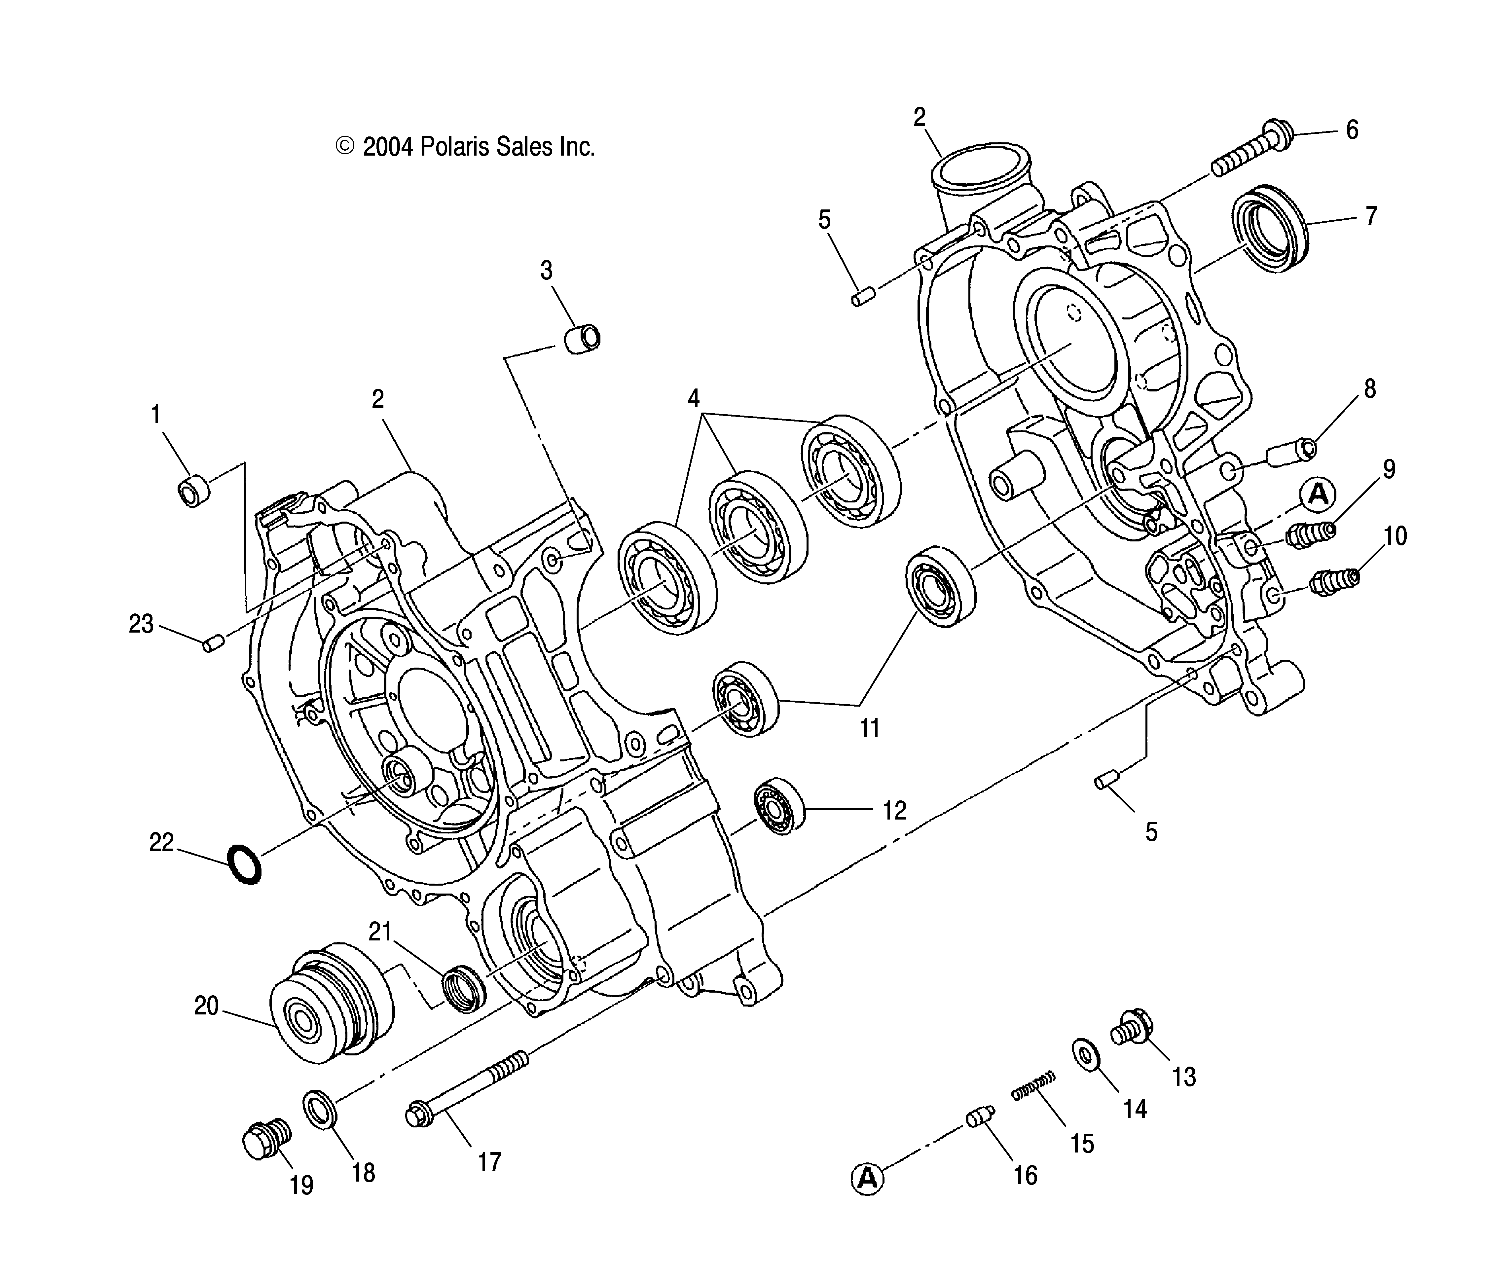 Part Number : 3089240 CRANKCASE ASSEMBLY